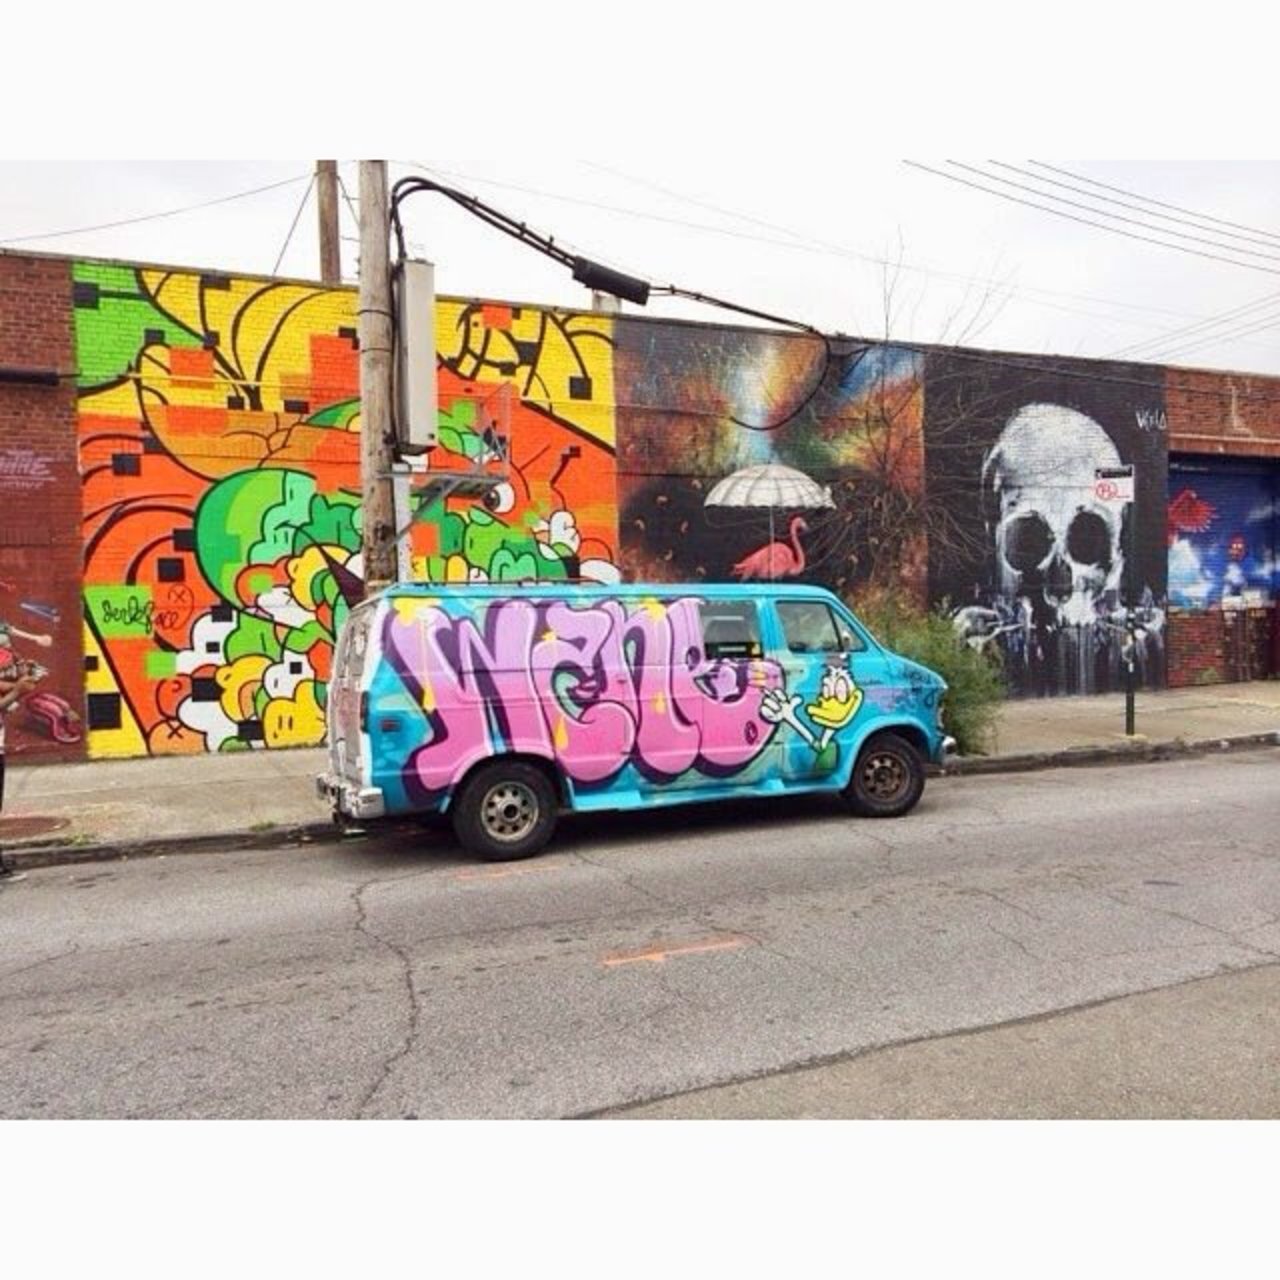 I saw this van in #brooklyn . Does anyone know of the #artist ? #streetart #graffiti https://t.co/FlTPCTN01K